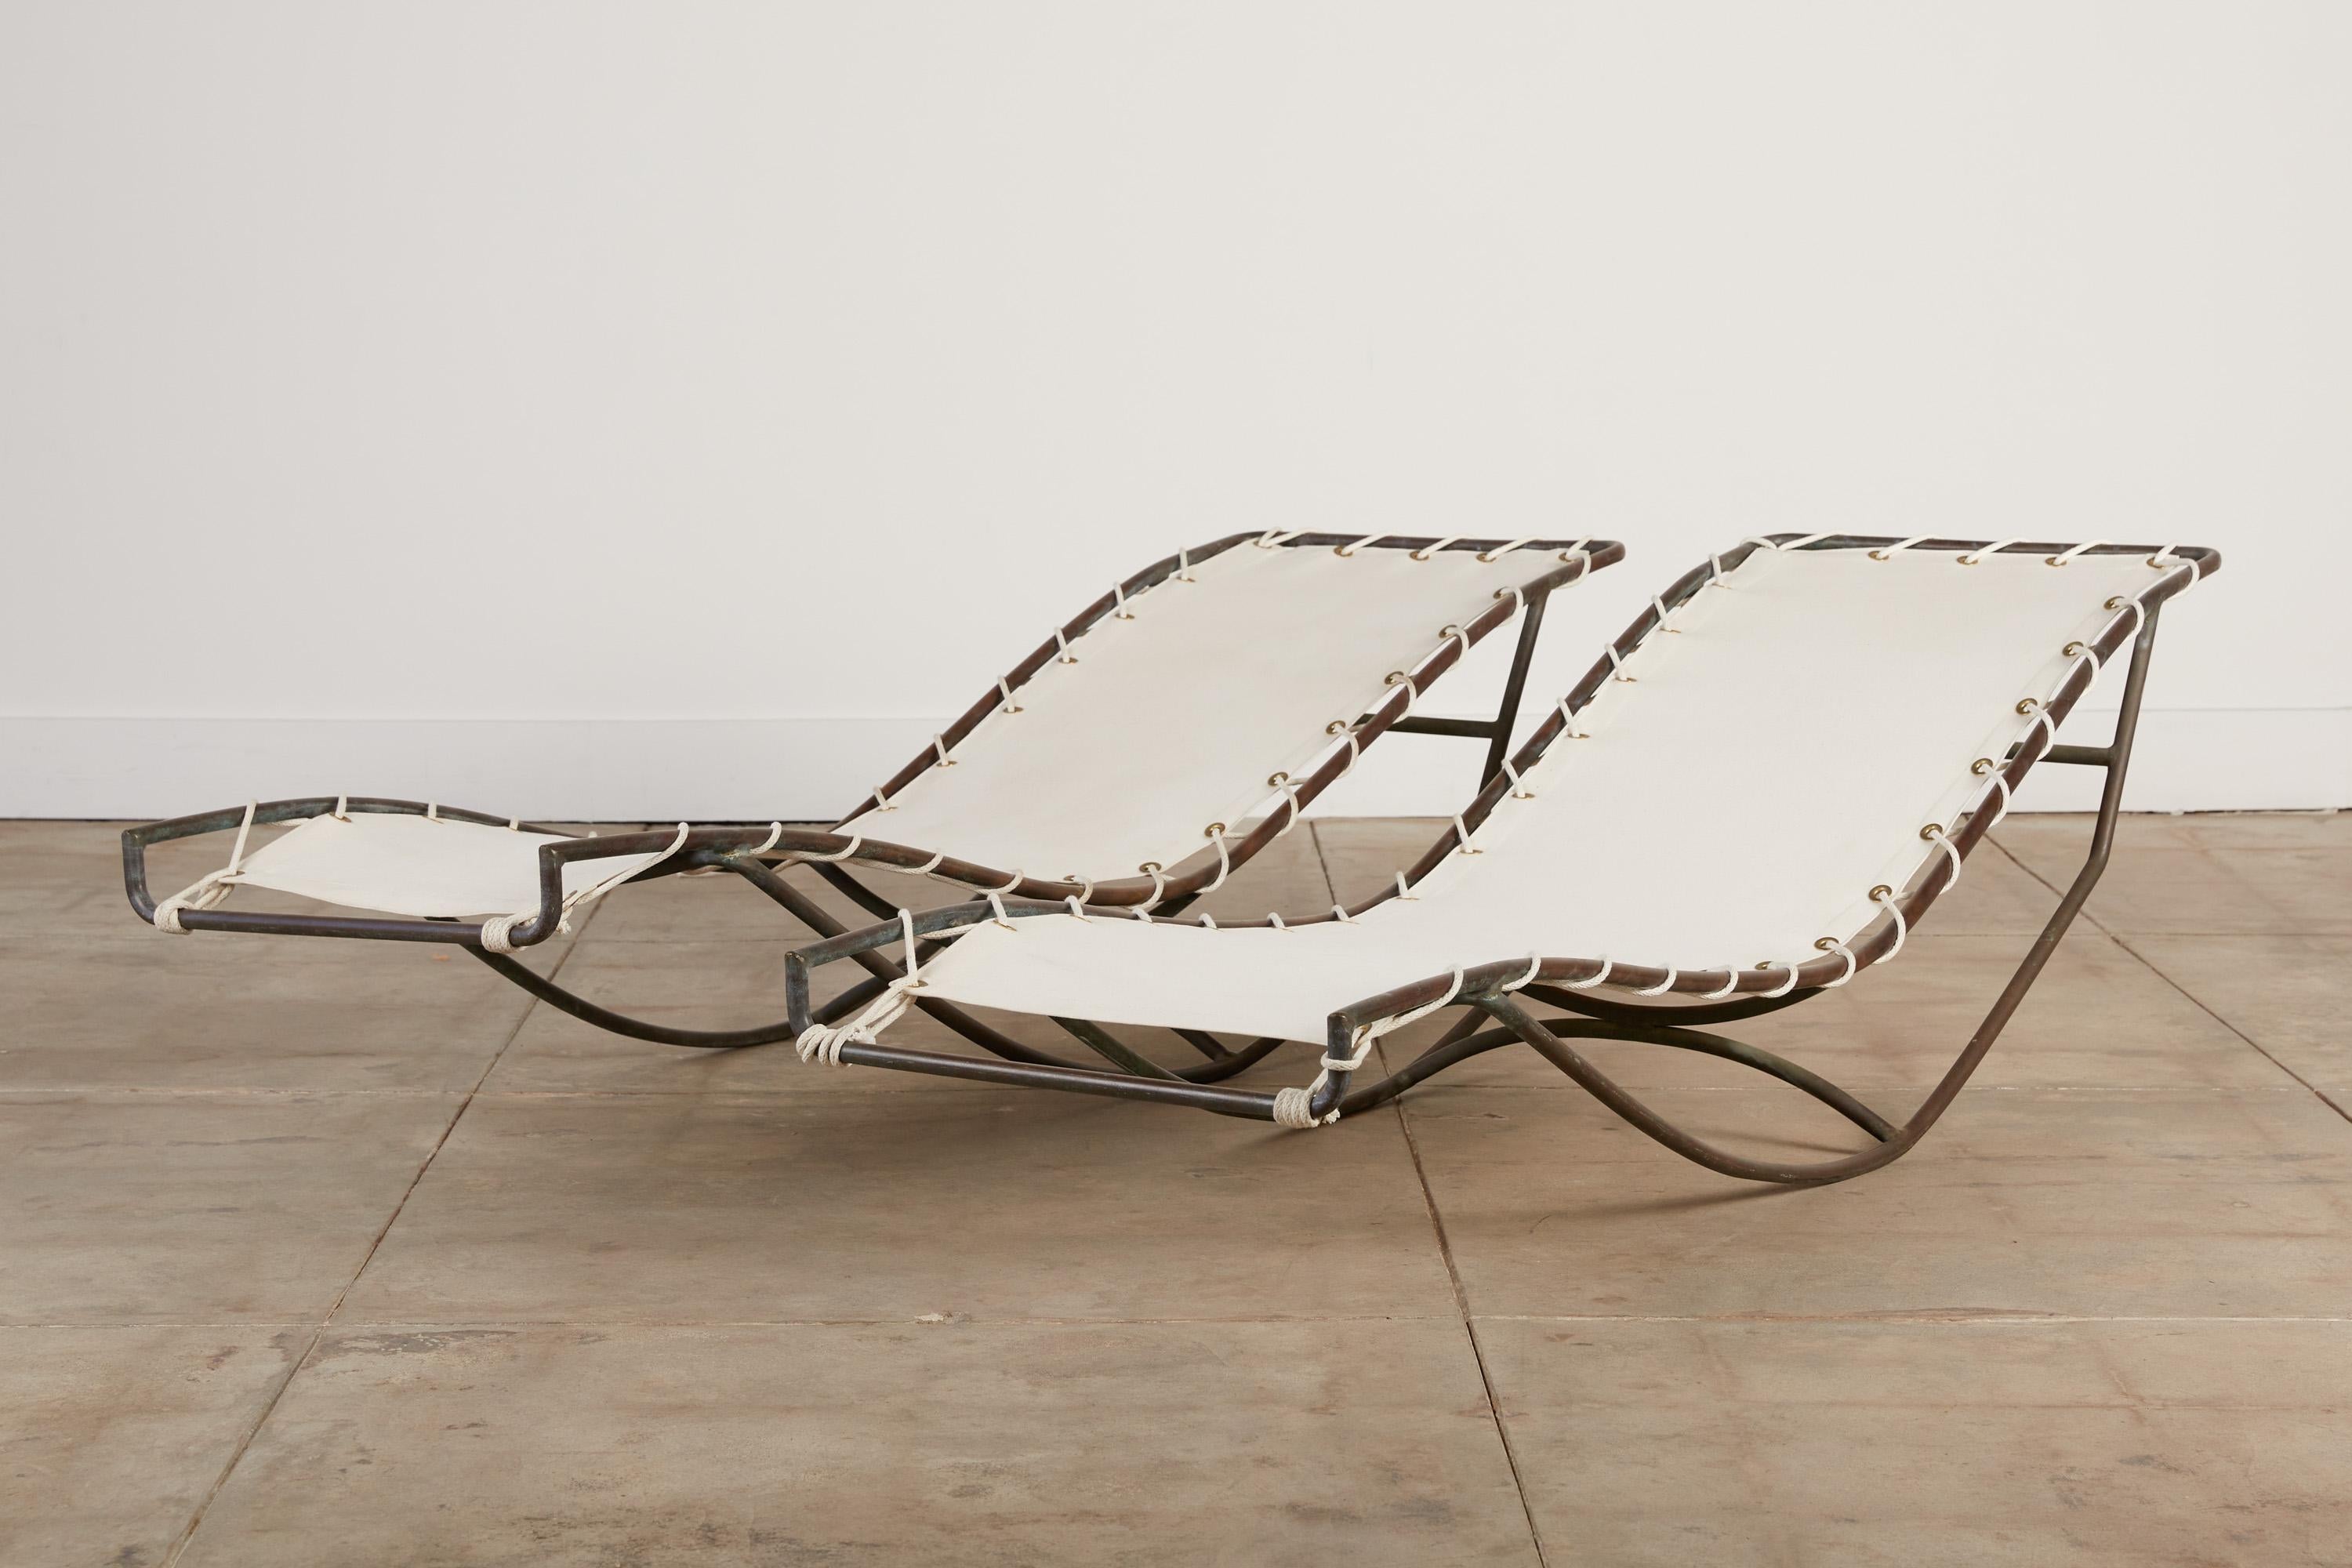 Bronze rocking lounge chair designed by Walter Lamb and produced by Brown Jordan. The design, referred to as the “Waikiki” chair, has a boat-like shape in tubular bronze with a sinuously curved seat on a pair of bent runners. Three C-shaped supports